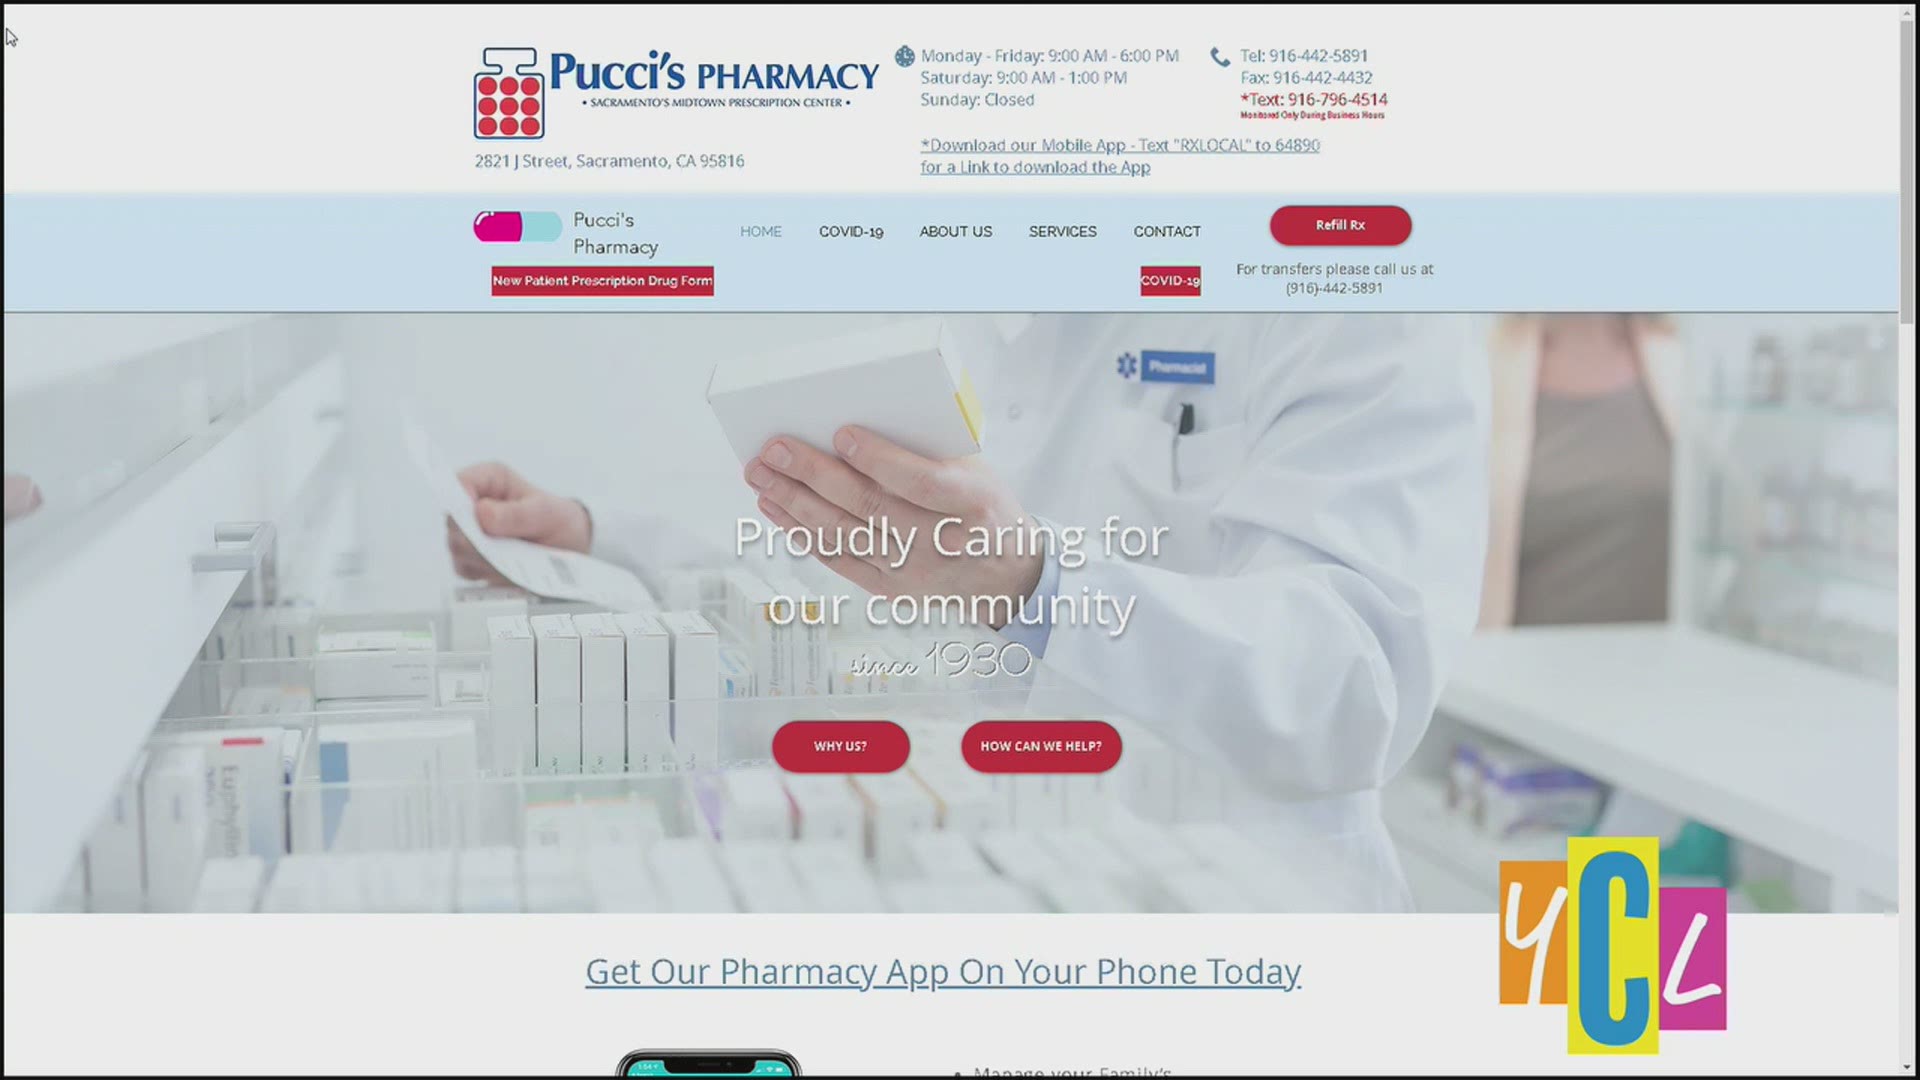 Pucci’s Pharmacy has been a long time Sacramento business for nearly 90 years. Hear a little about their history and how they're thriving in the pandemic.